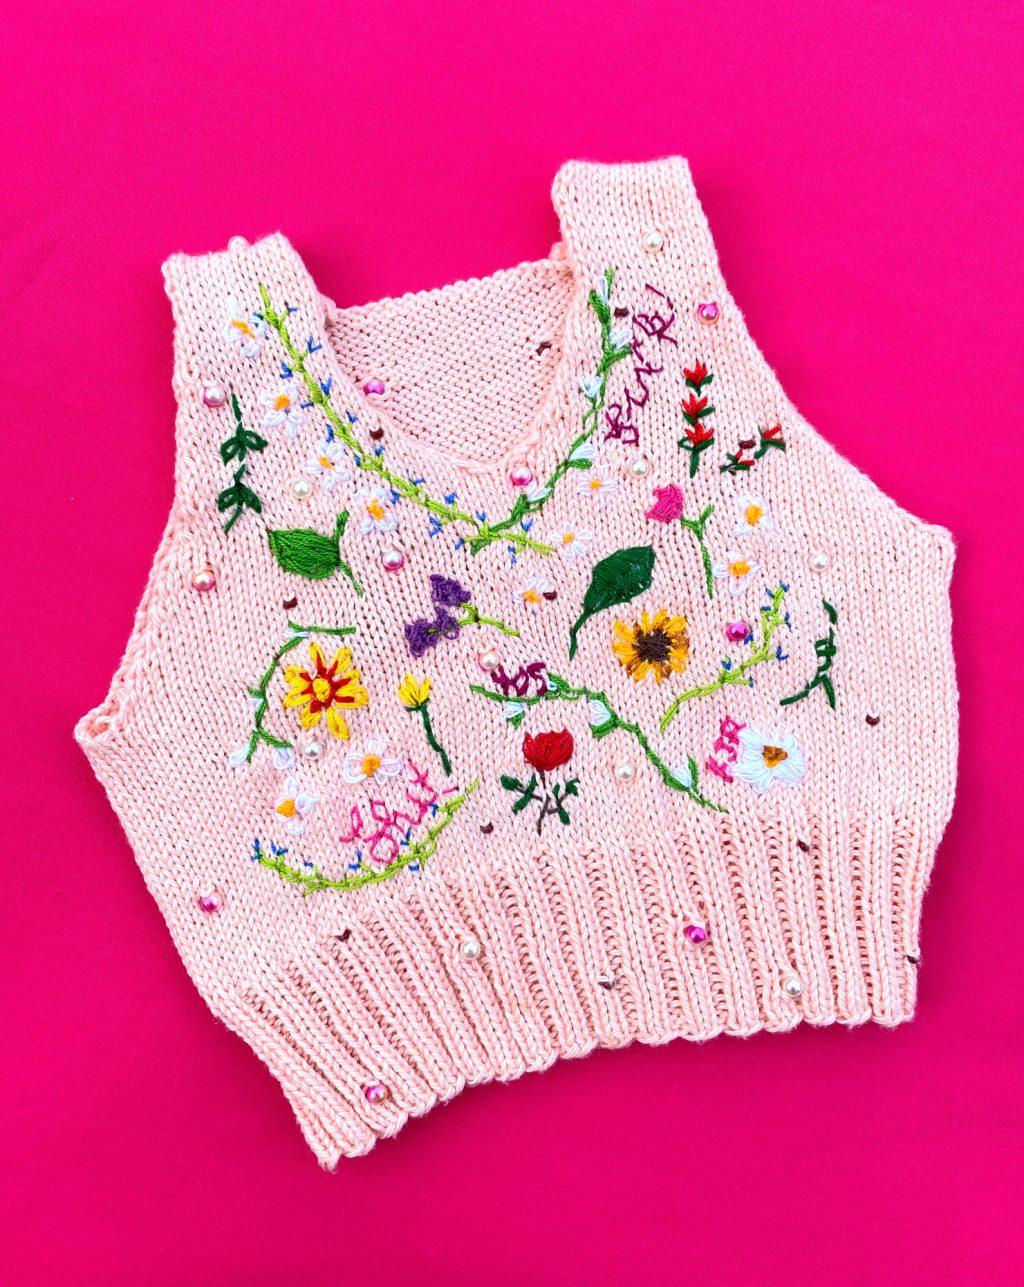 A vest Ross knit in June is photographed on her hot pink kitchen table for an Instagram post that shows off her work. Ross said she has recently started incorporating beadwork into her knitwear, like the floral designs in this piece.